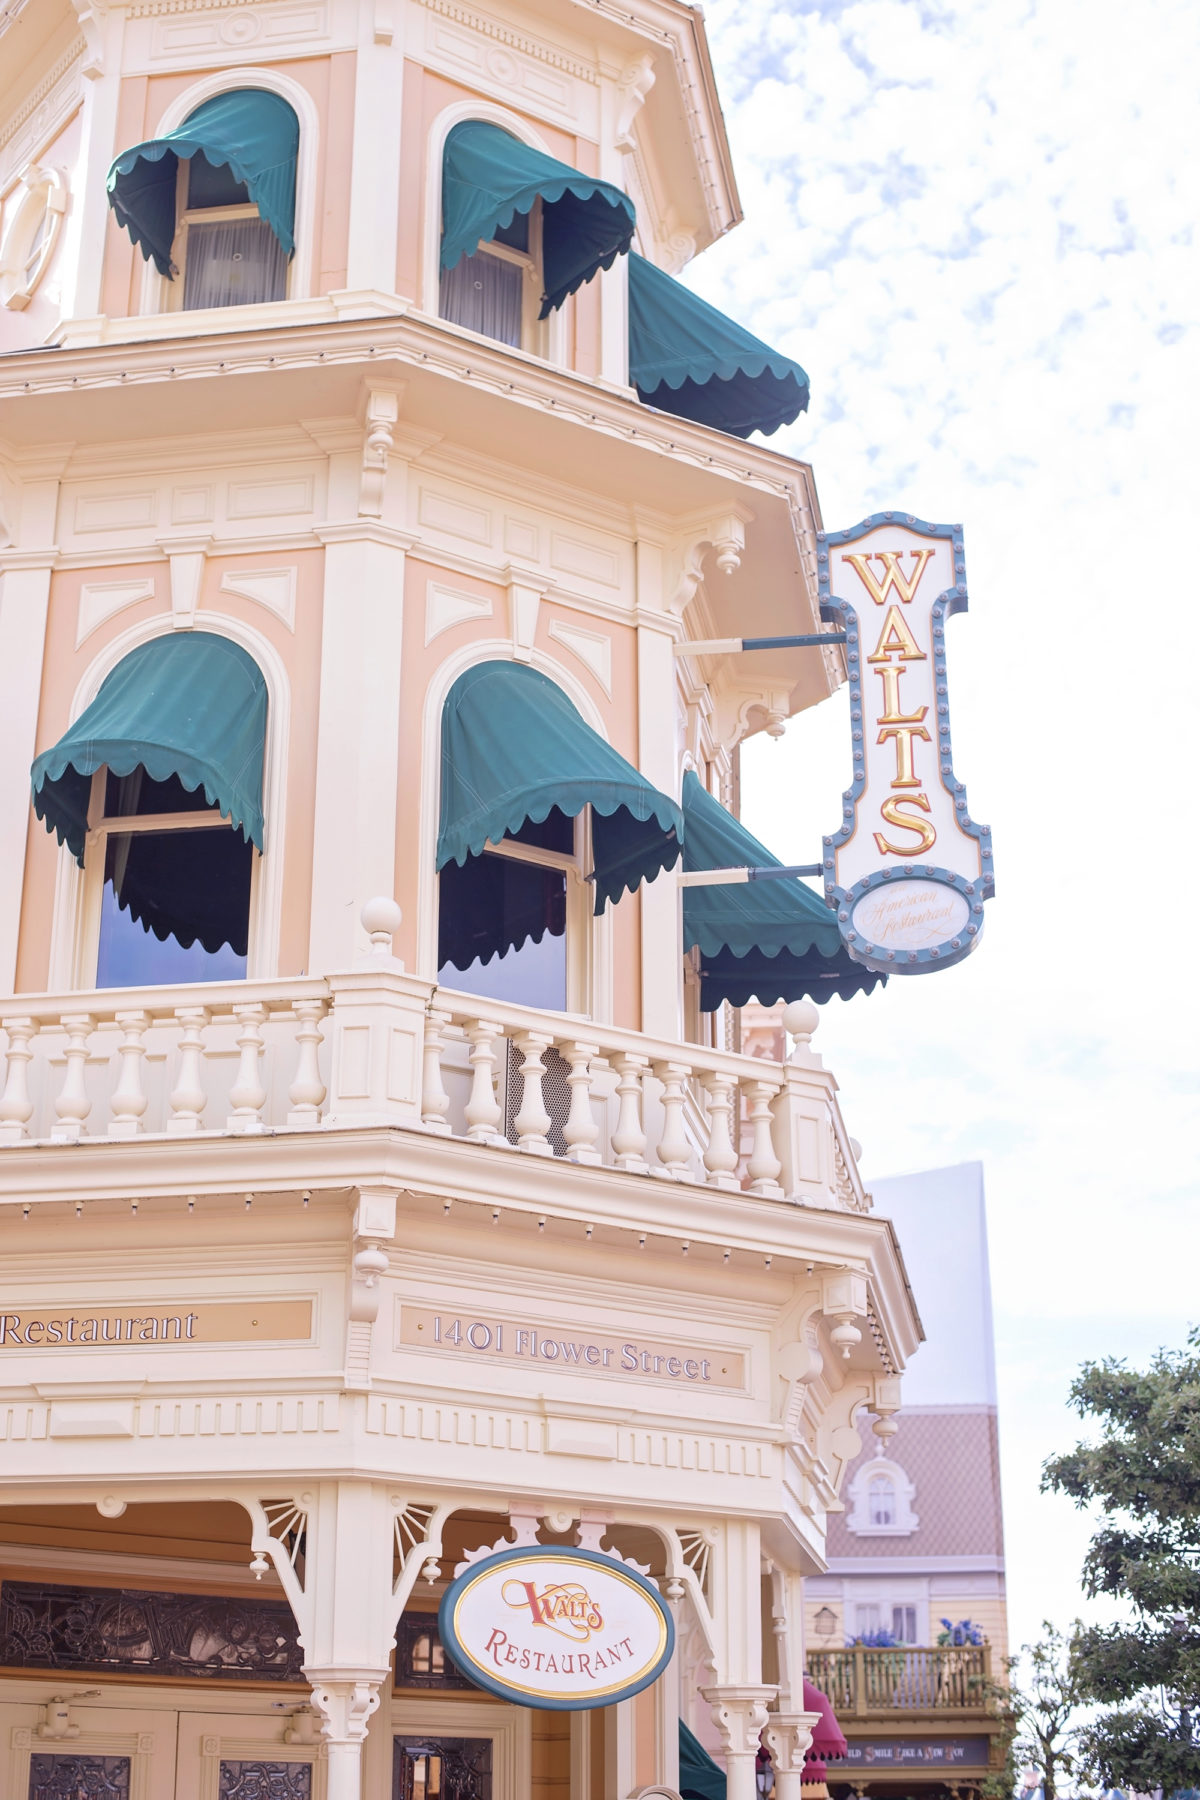 Image shows the exterior of Walt's Restaurant on Main Street, Disneyland Paris in the daytime. The building is pink and the sign 1402 flower street can be seen above the sign.  Green fabric awning shutters are over the windows.